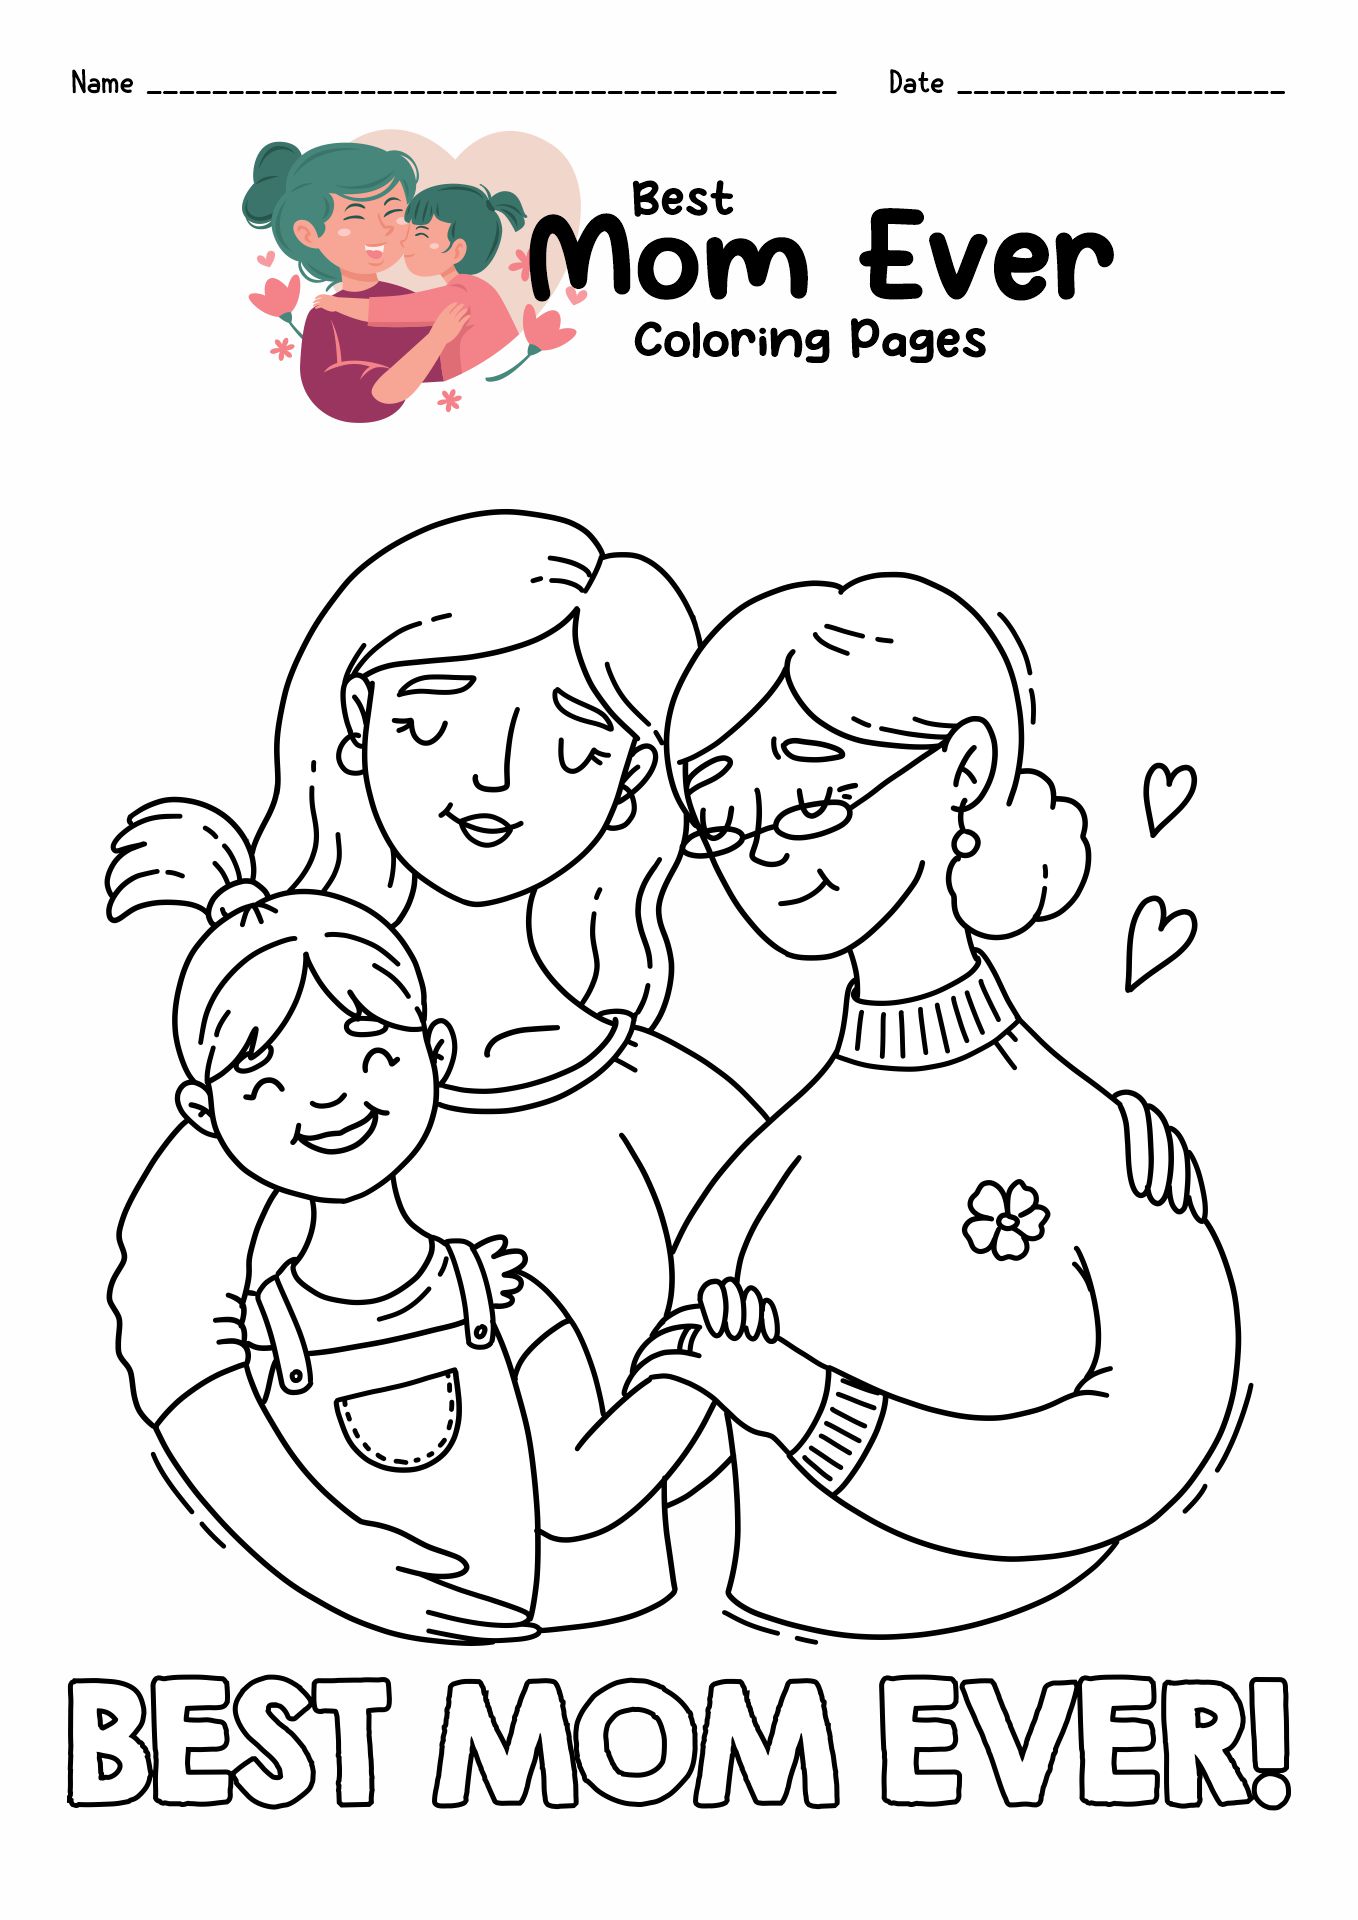 Best Mom Ever Coloring Pages Image